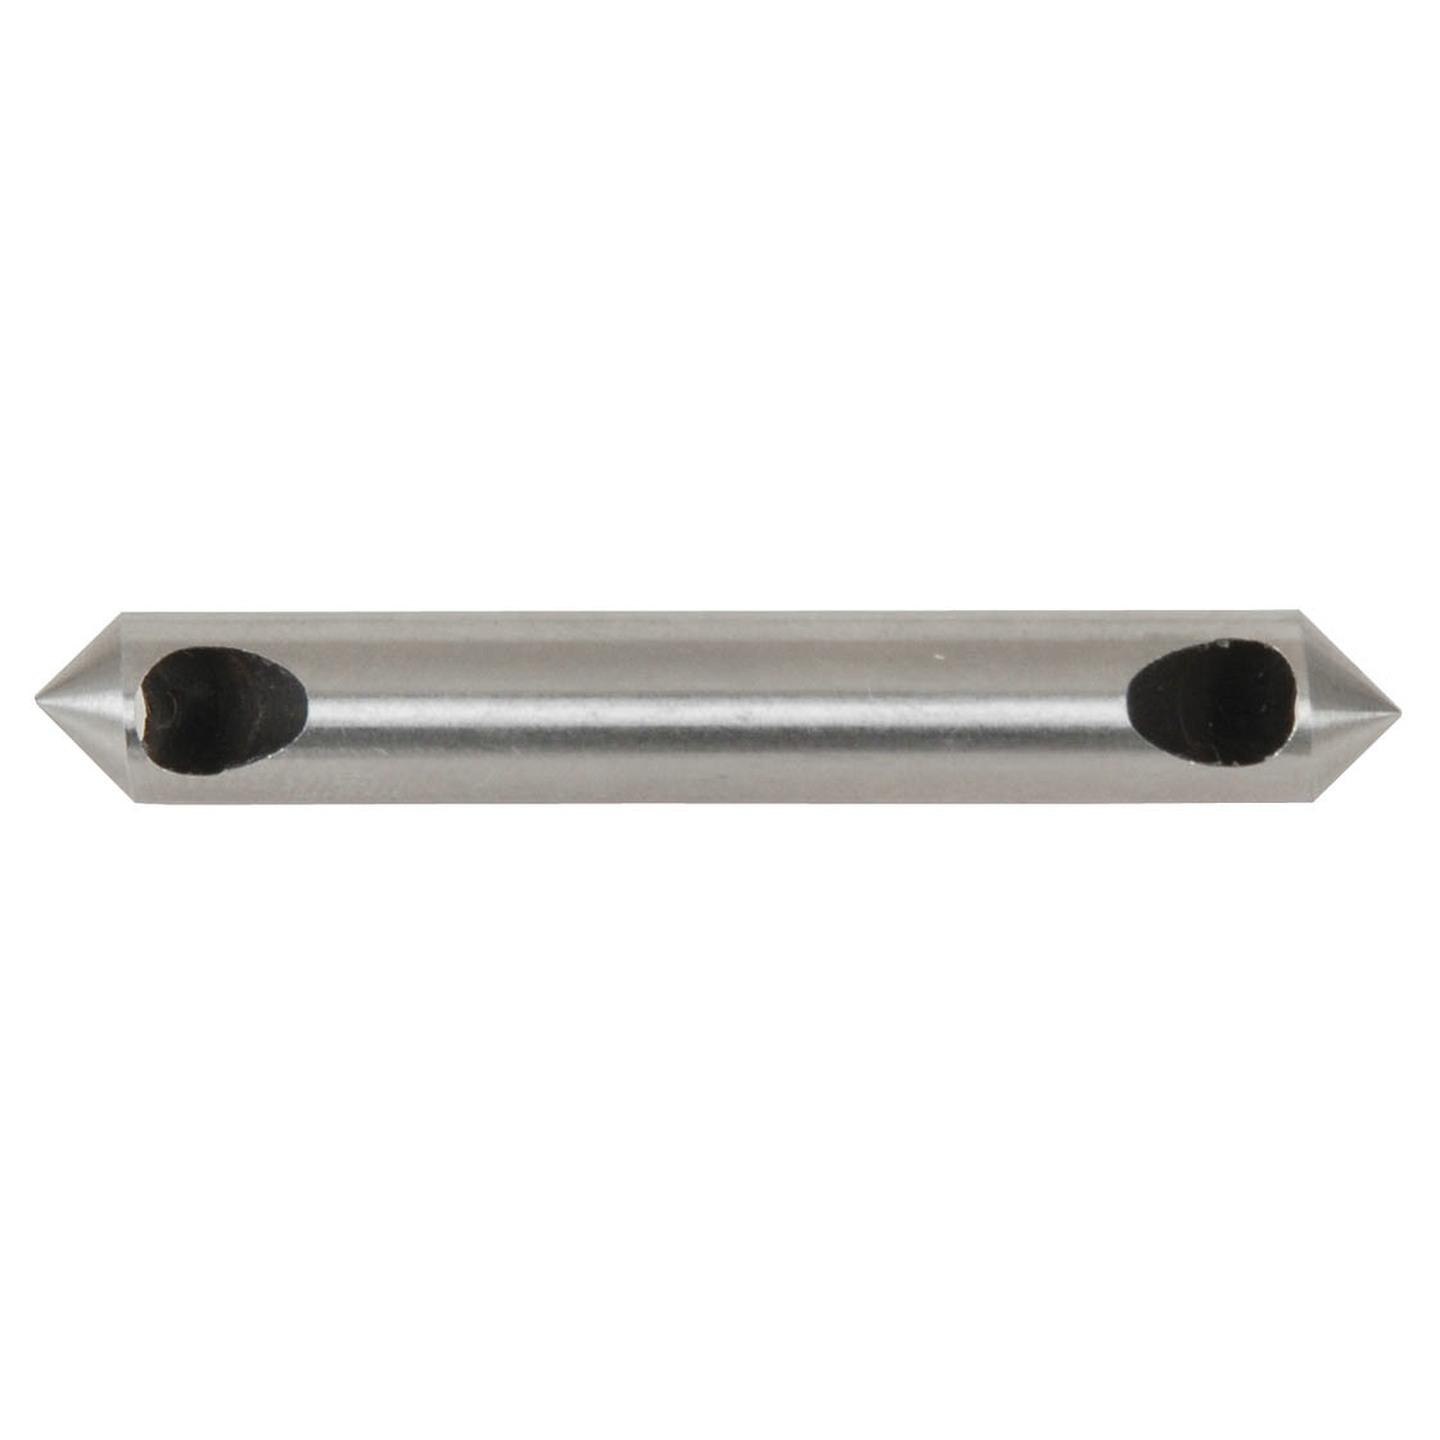 Double Ended Ti-N Countersink Bit 1 - 4mm